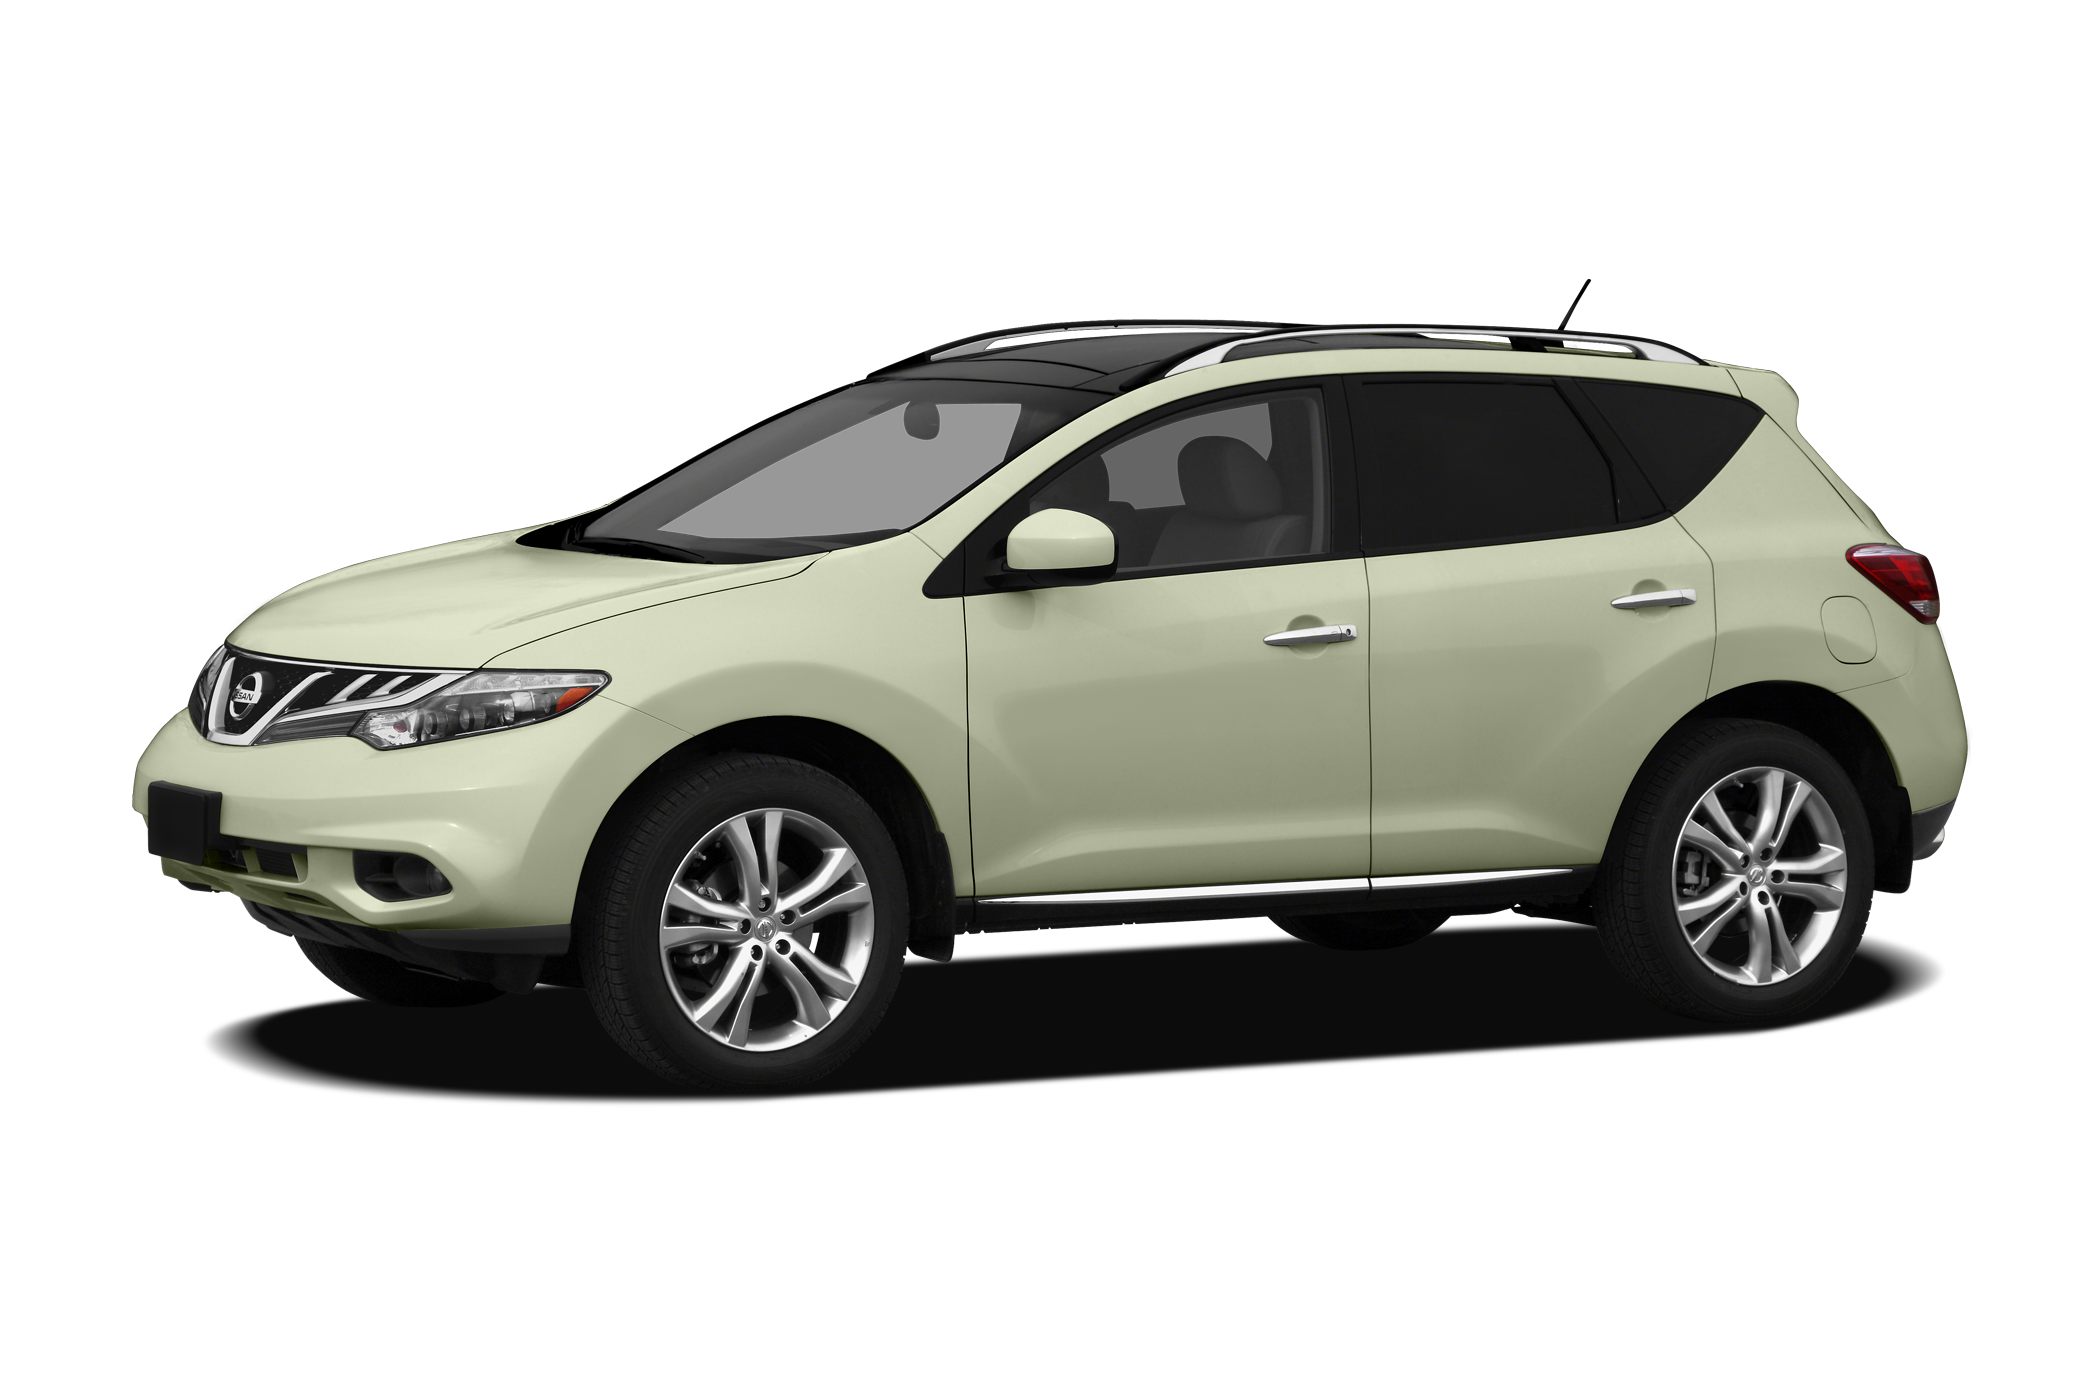 2011 Nissan Murano Sl 4dr All Wheel Drive Pictures